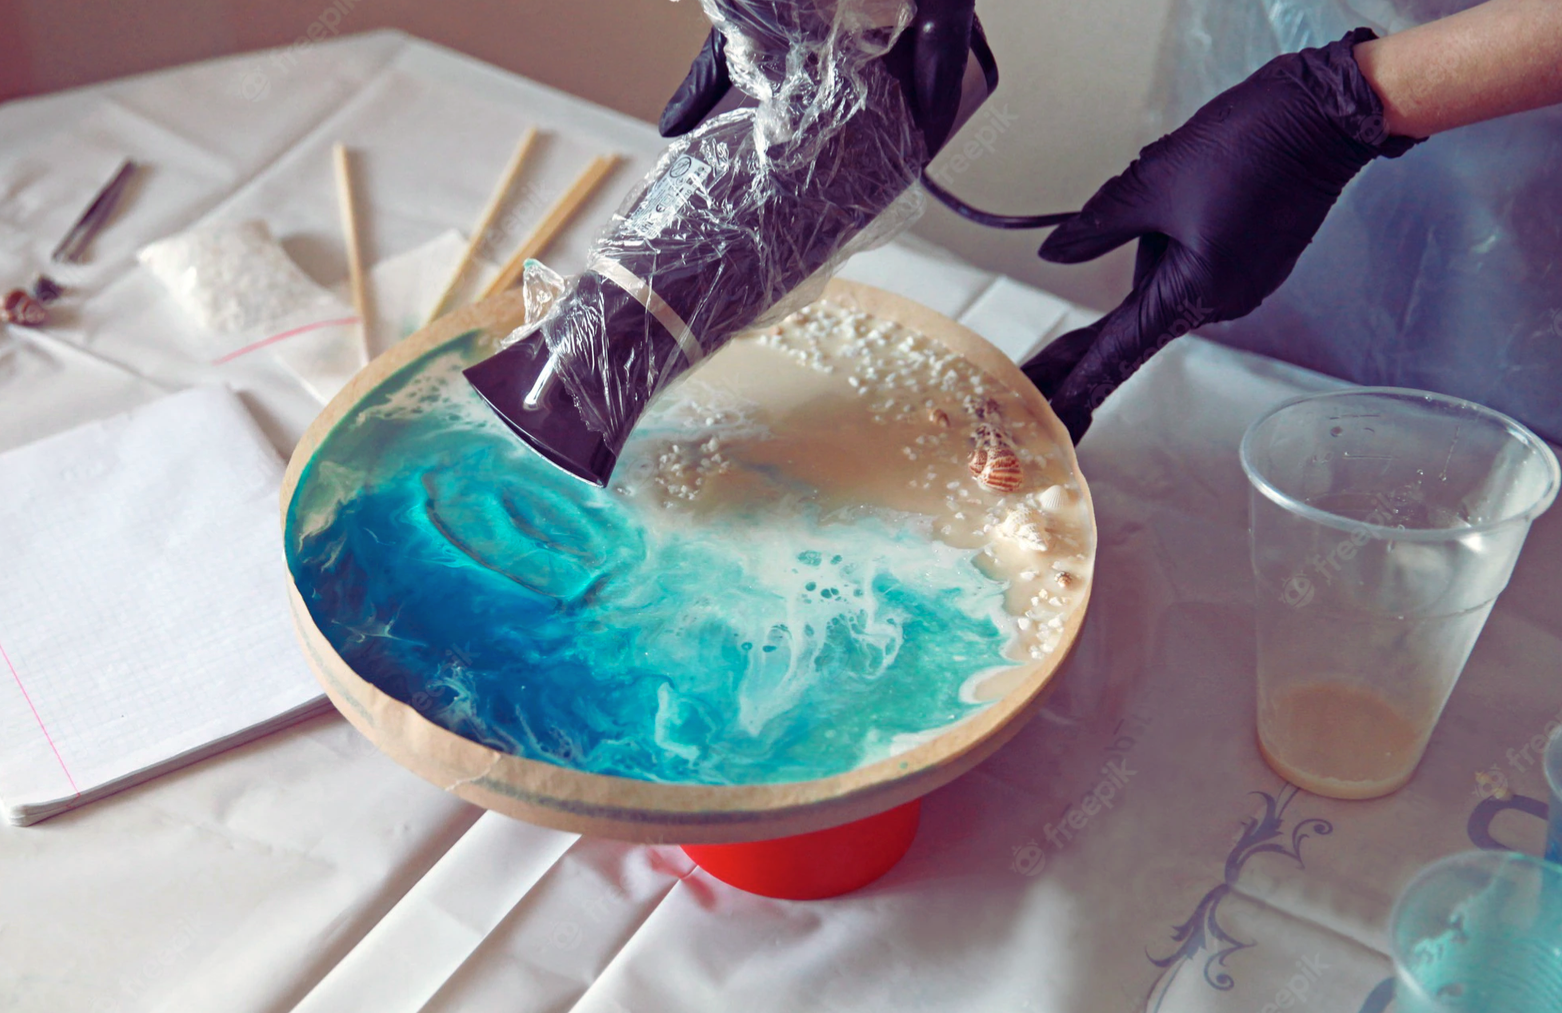 6 Essential Tips For Working With Epoxy Resin